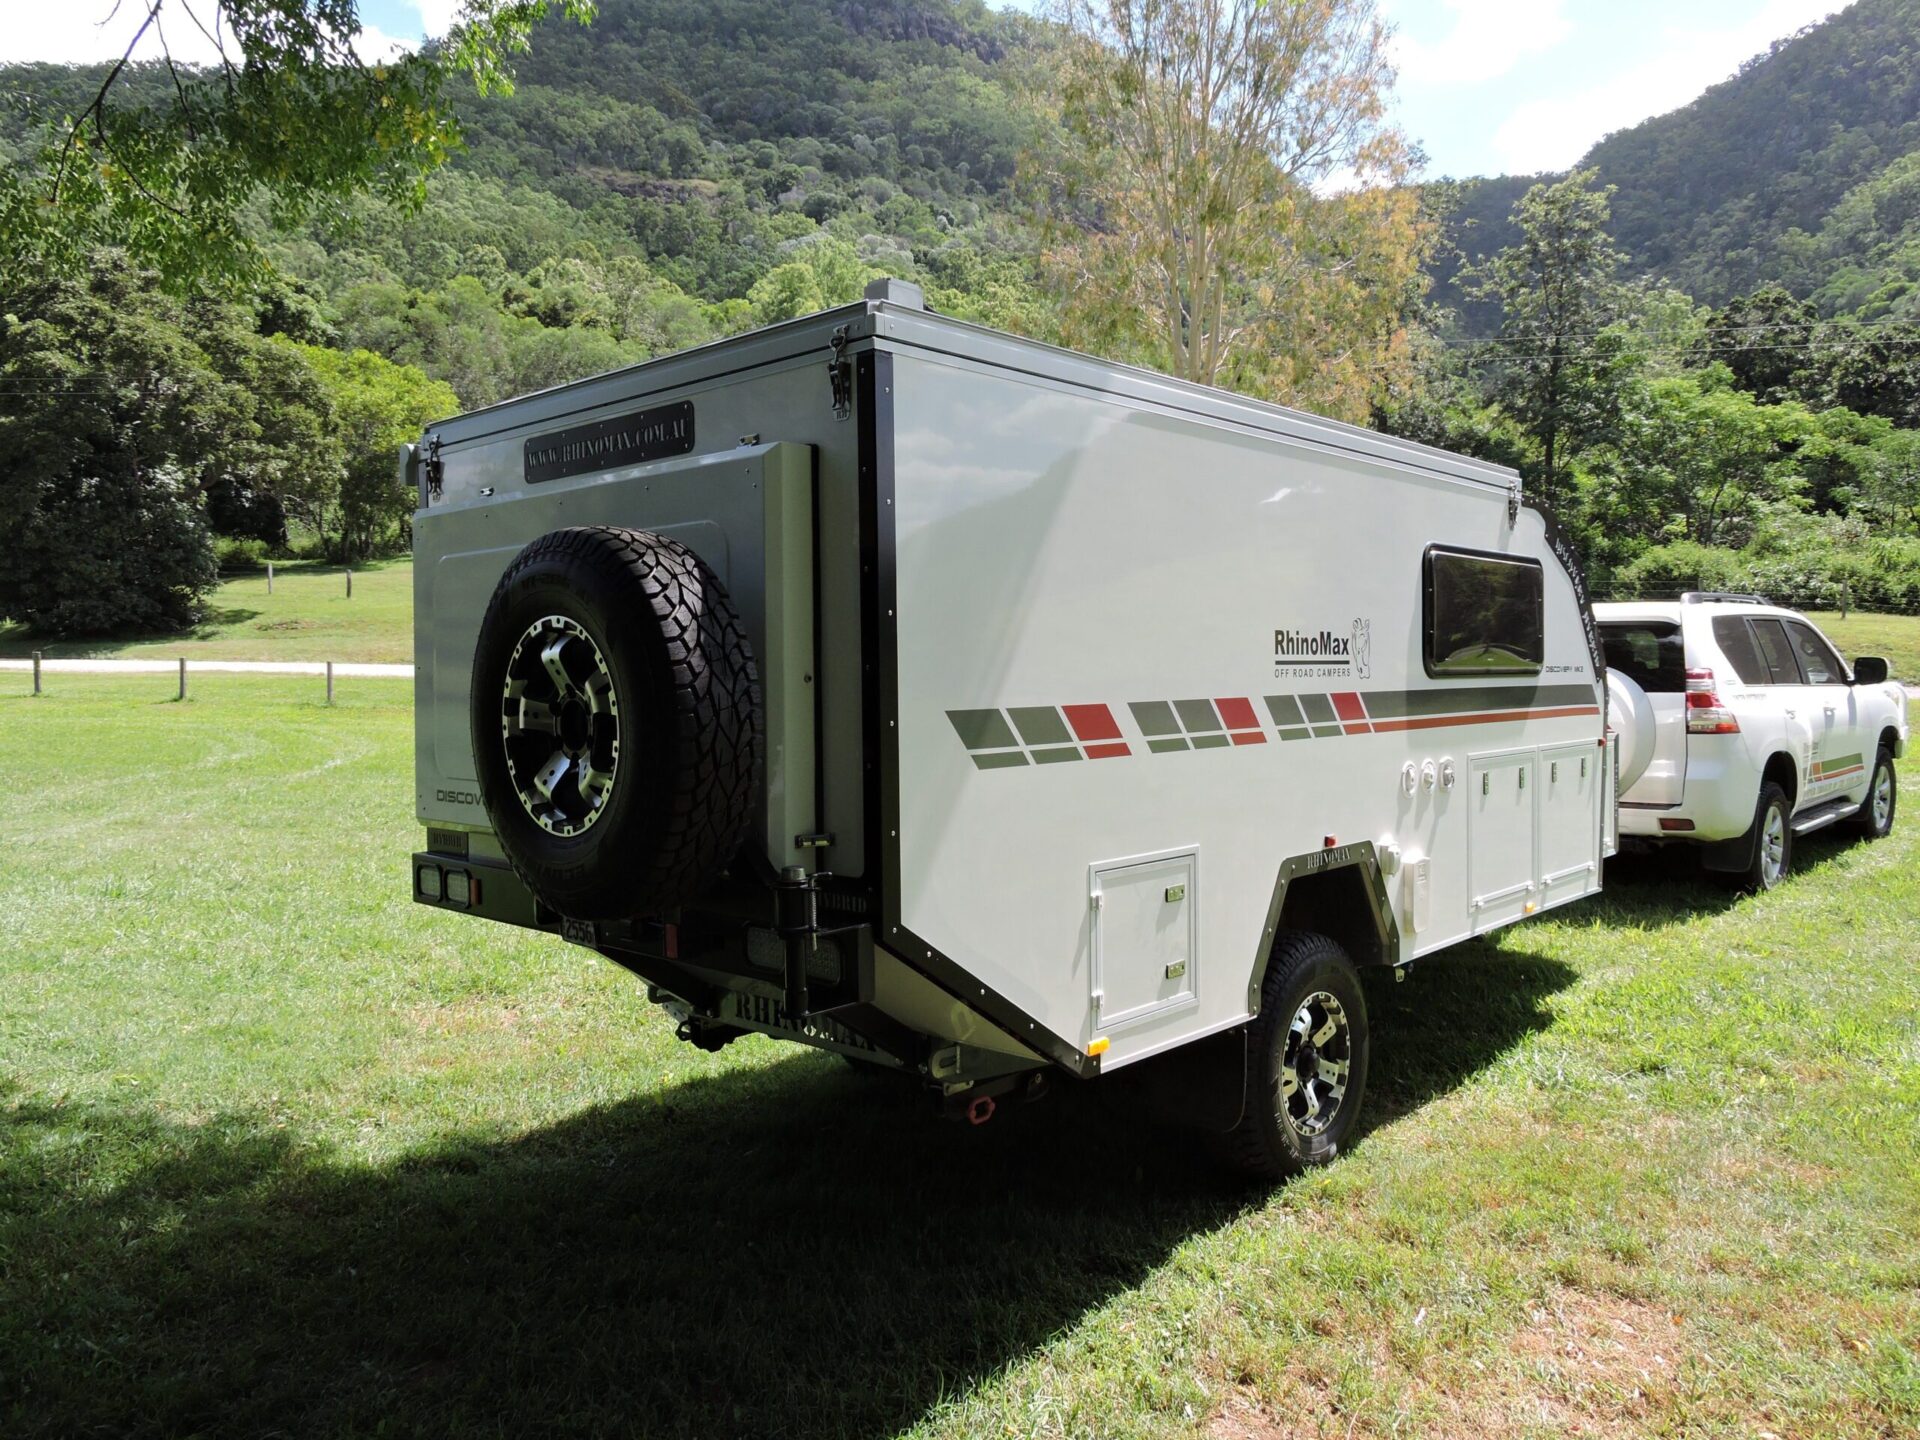 What is a hybrid camper